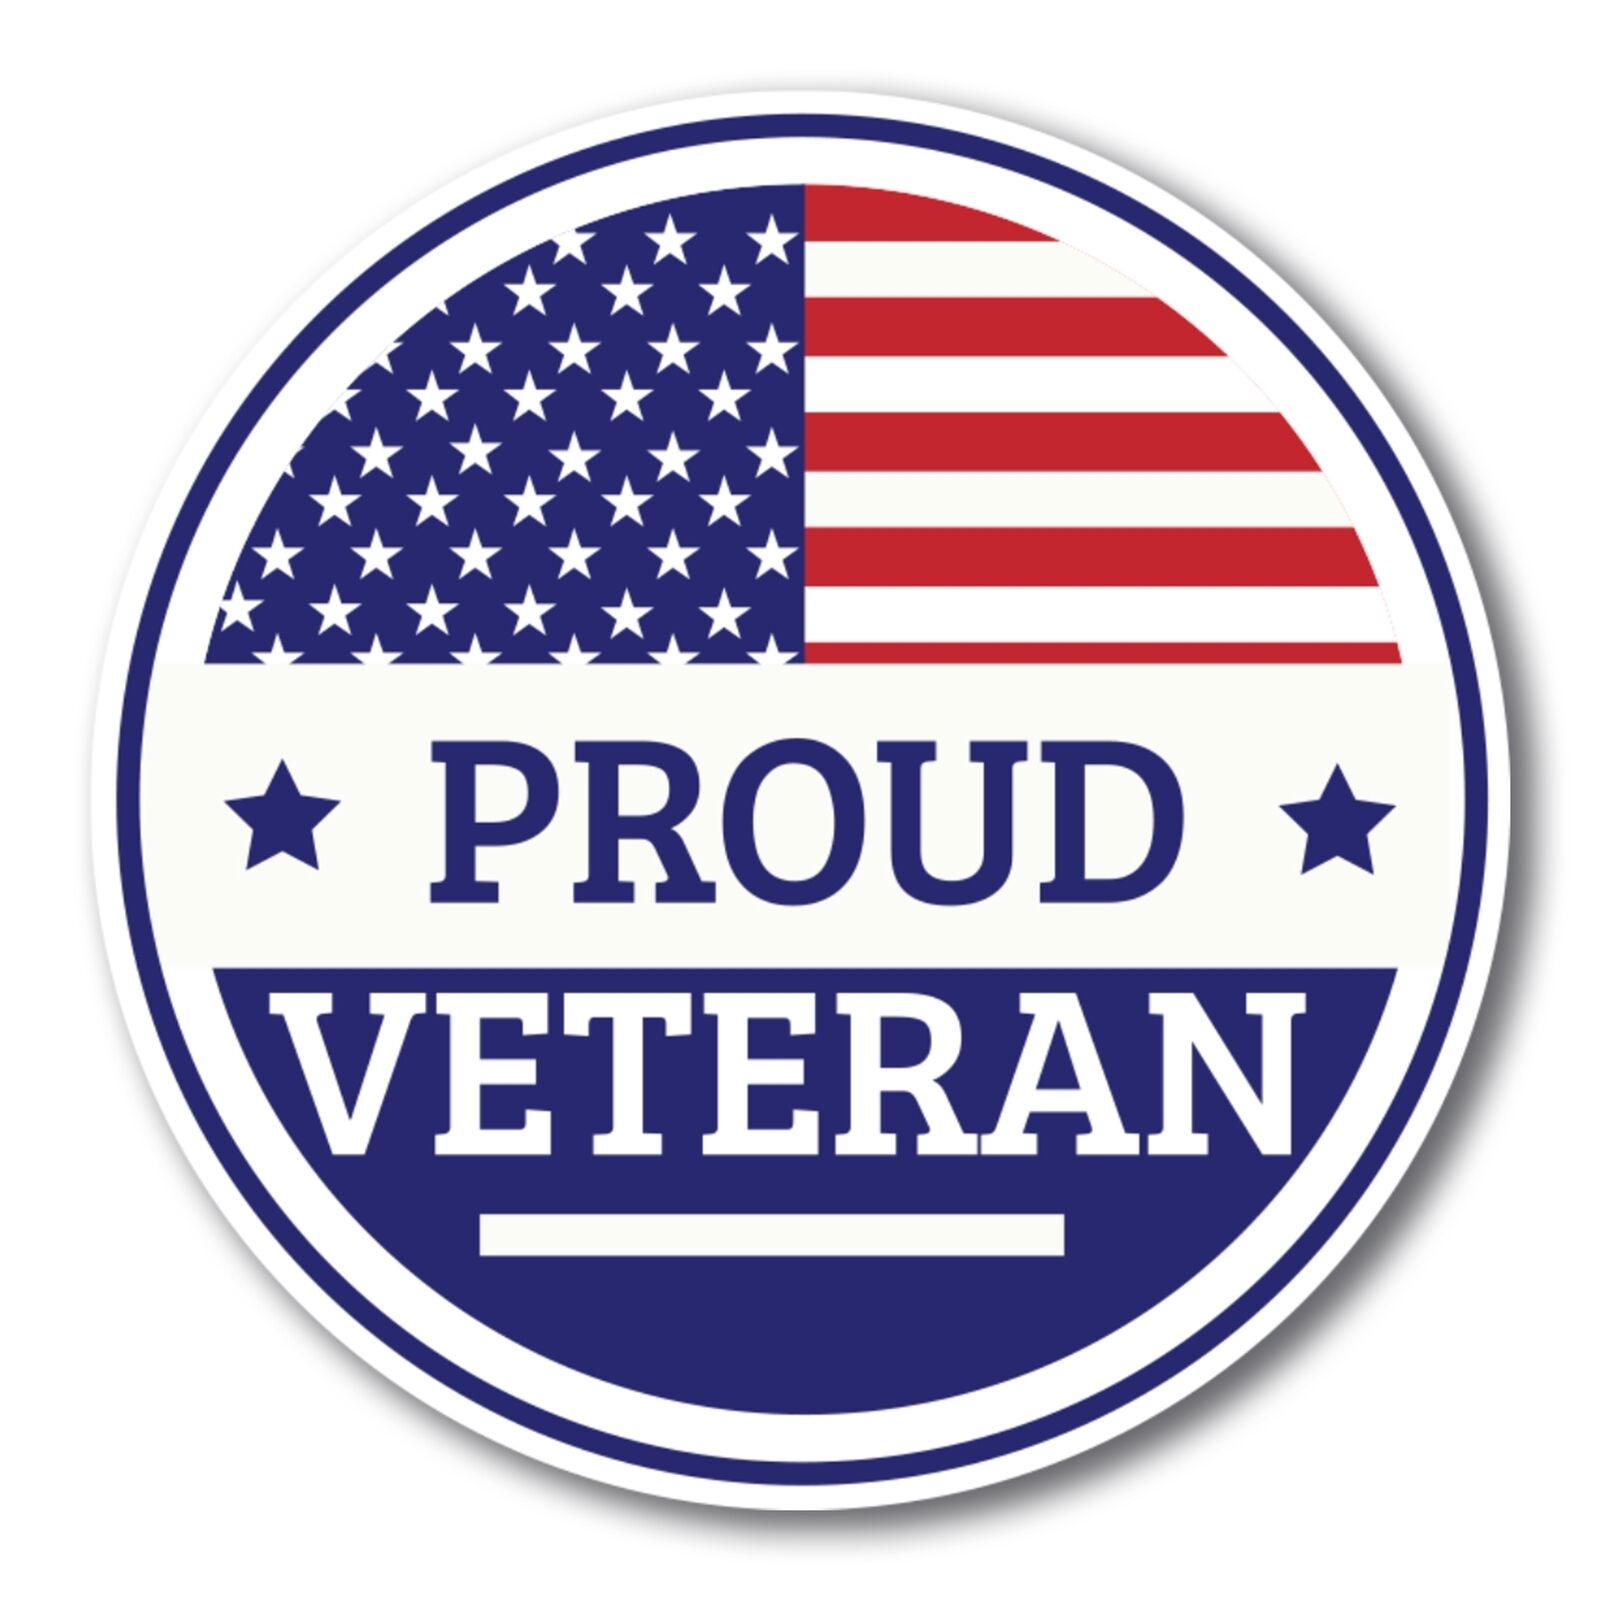 Magnet Me Up Proud Veteran Patriotic Red White and Blue Military Magnet Decal